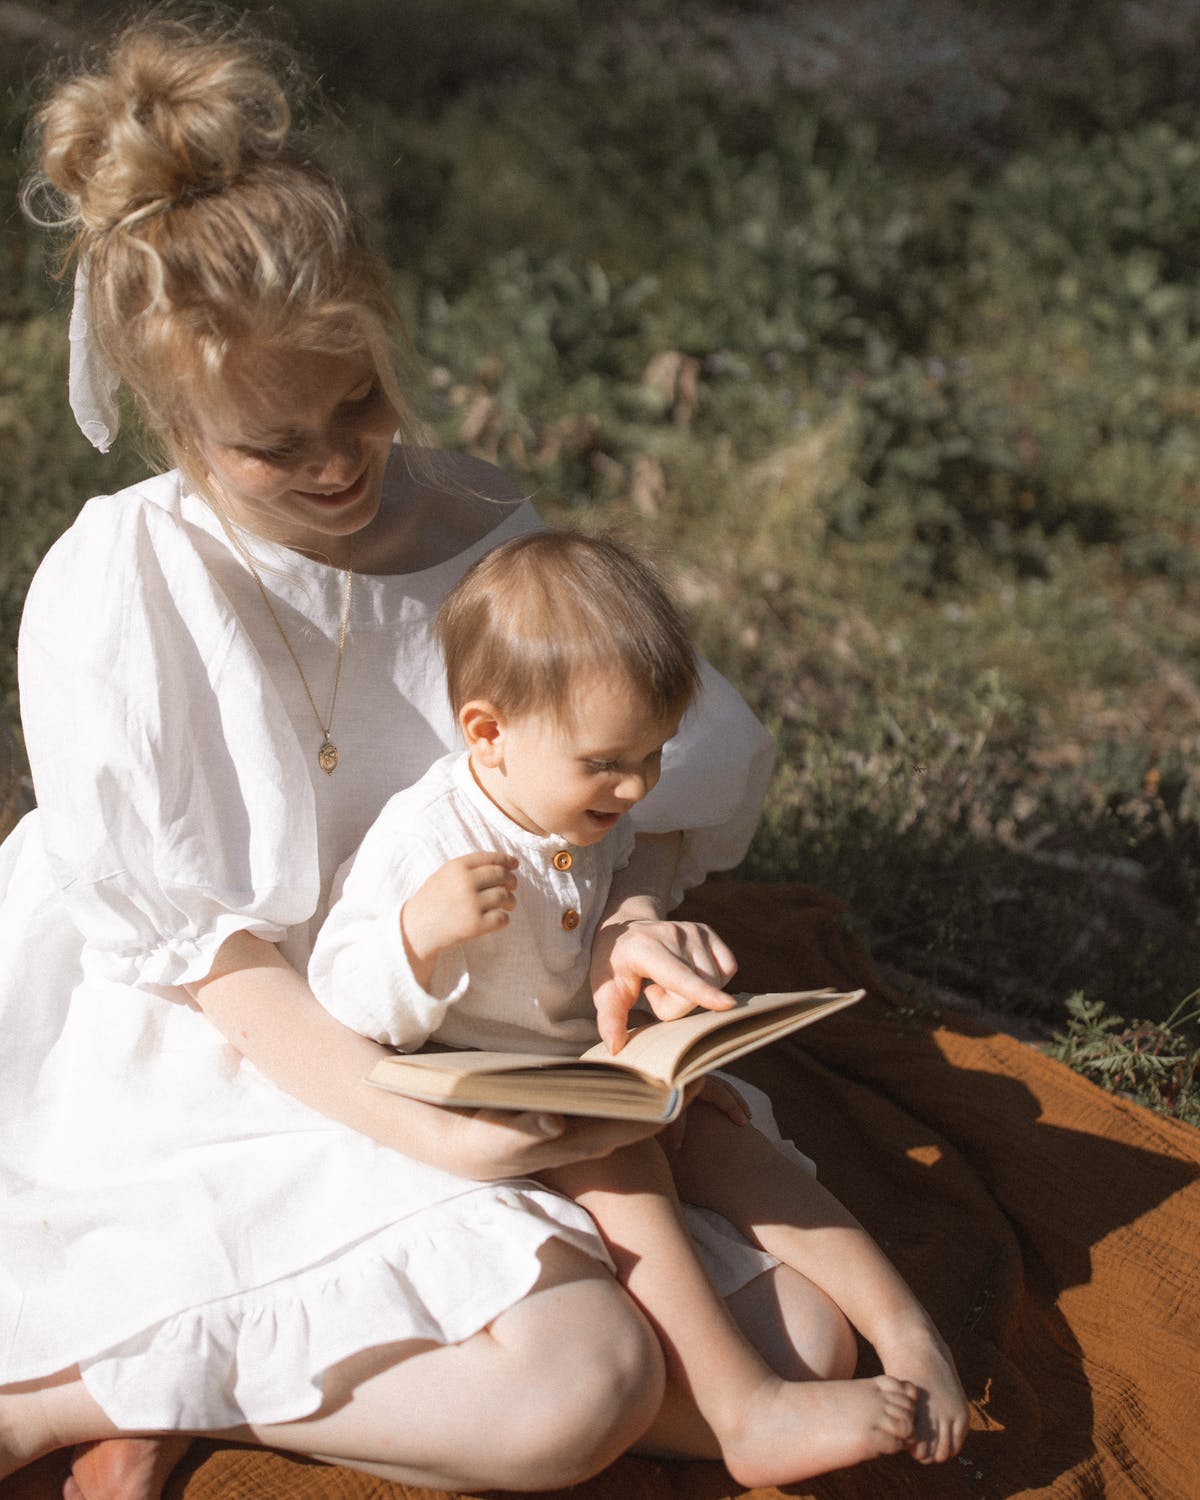 Woman reading a book with a baby girl | Source: Pexels